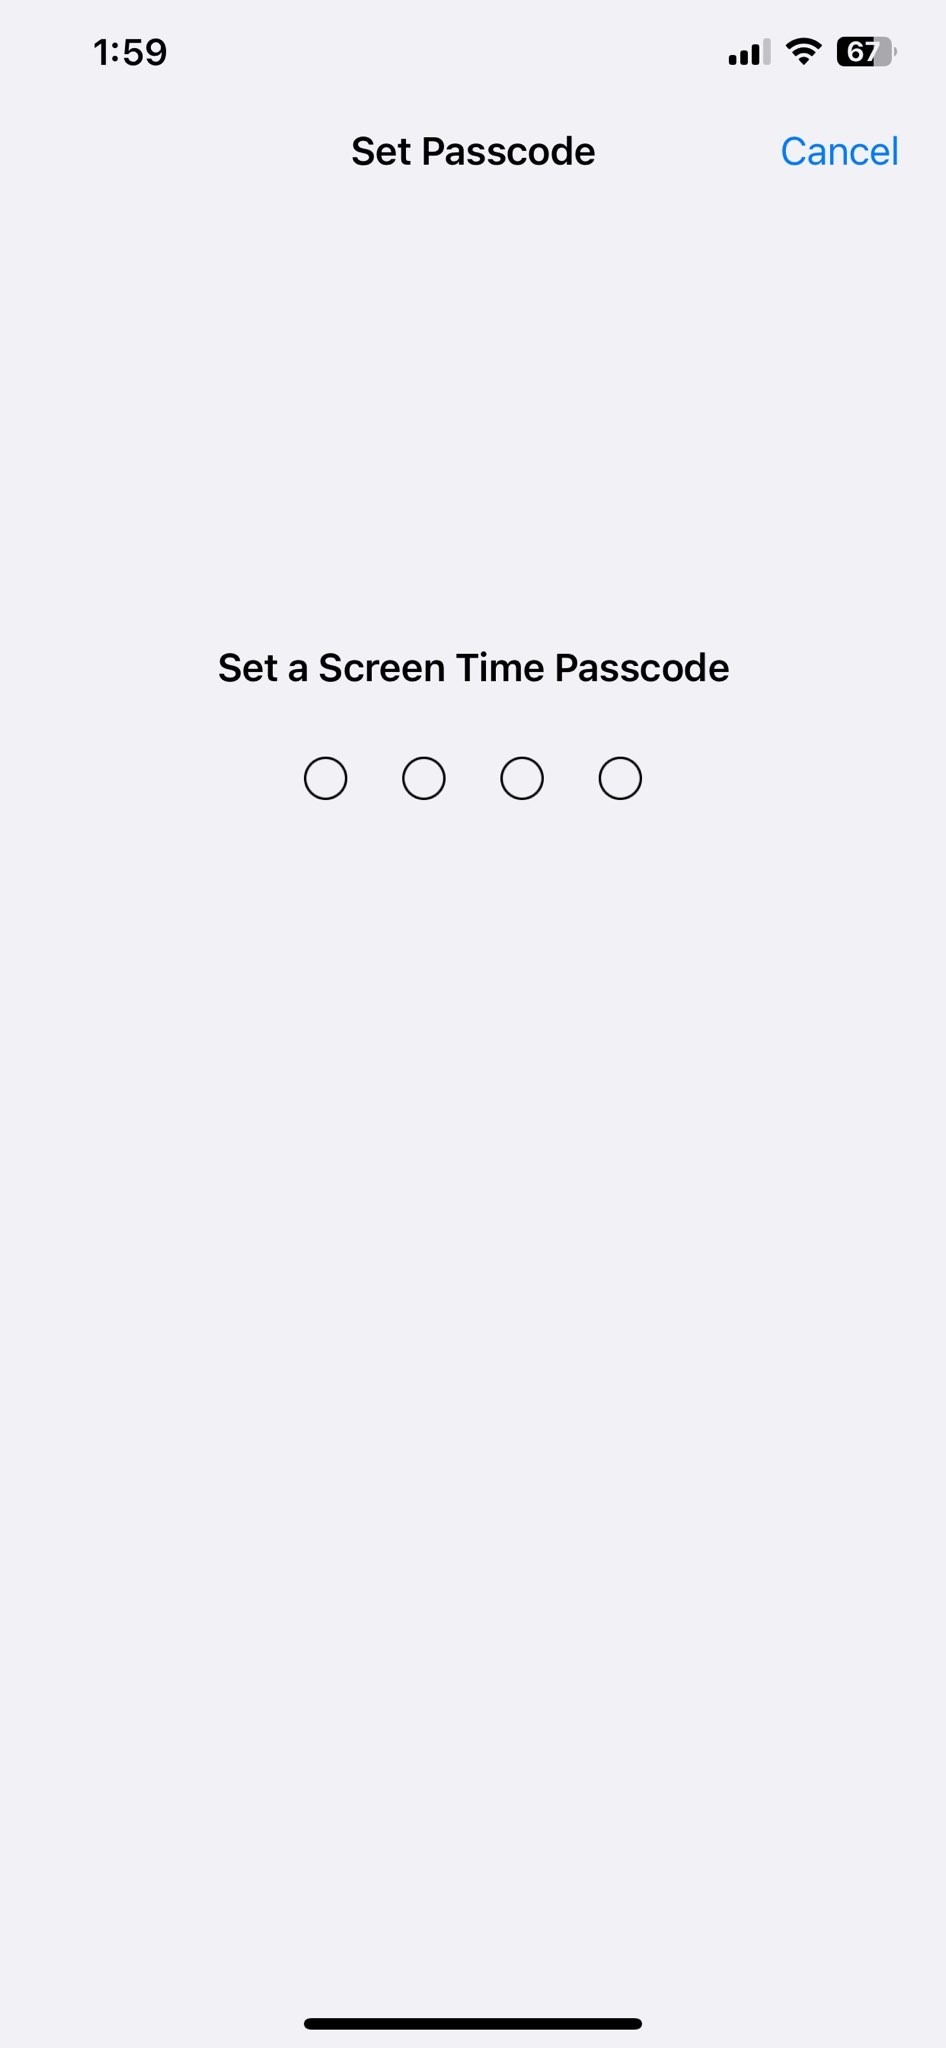 enter a restrictions passcode to lock the settings